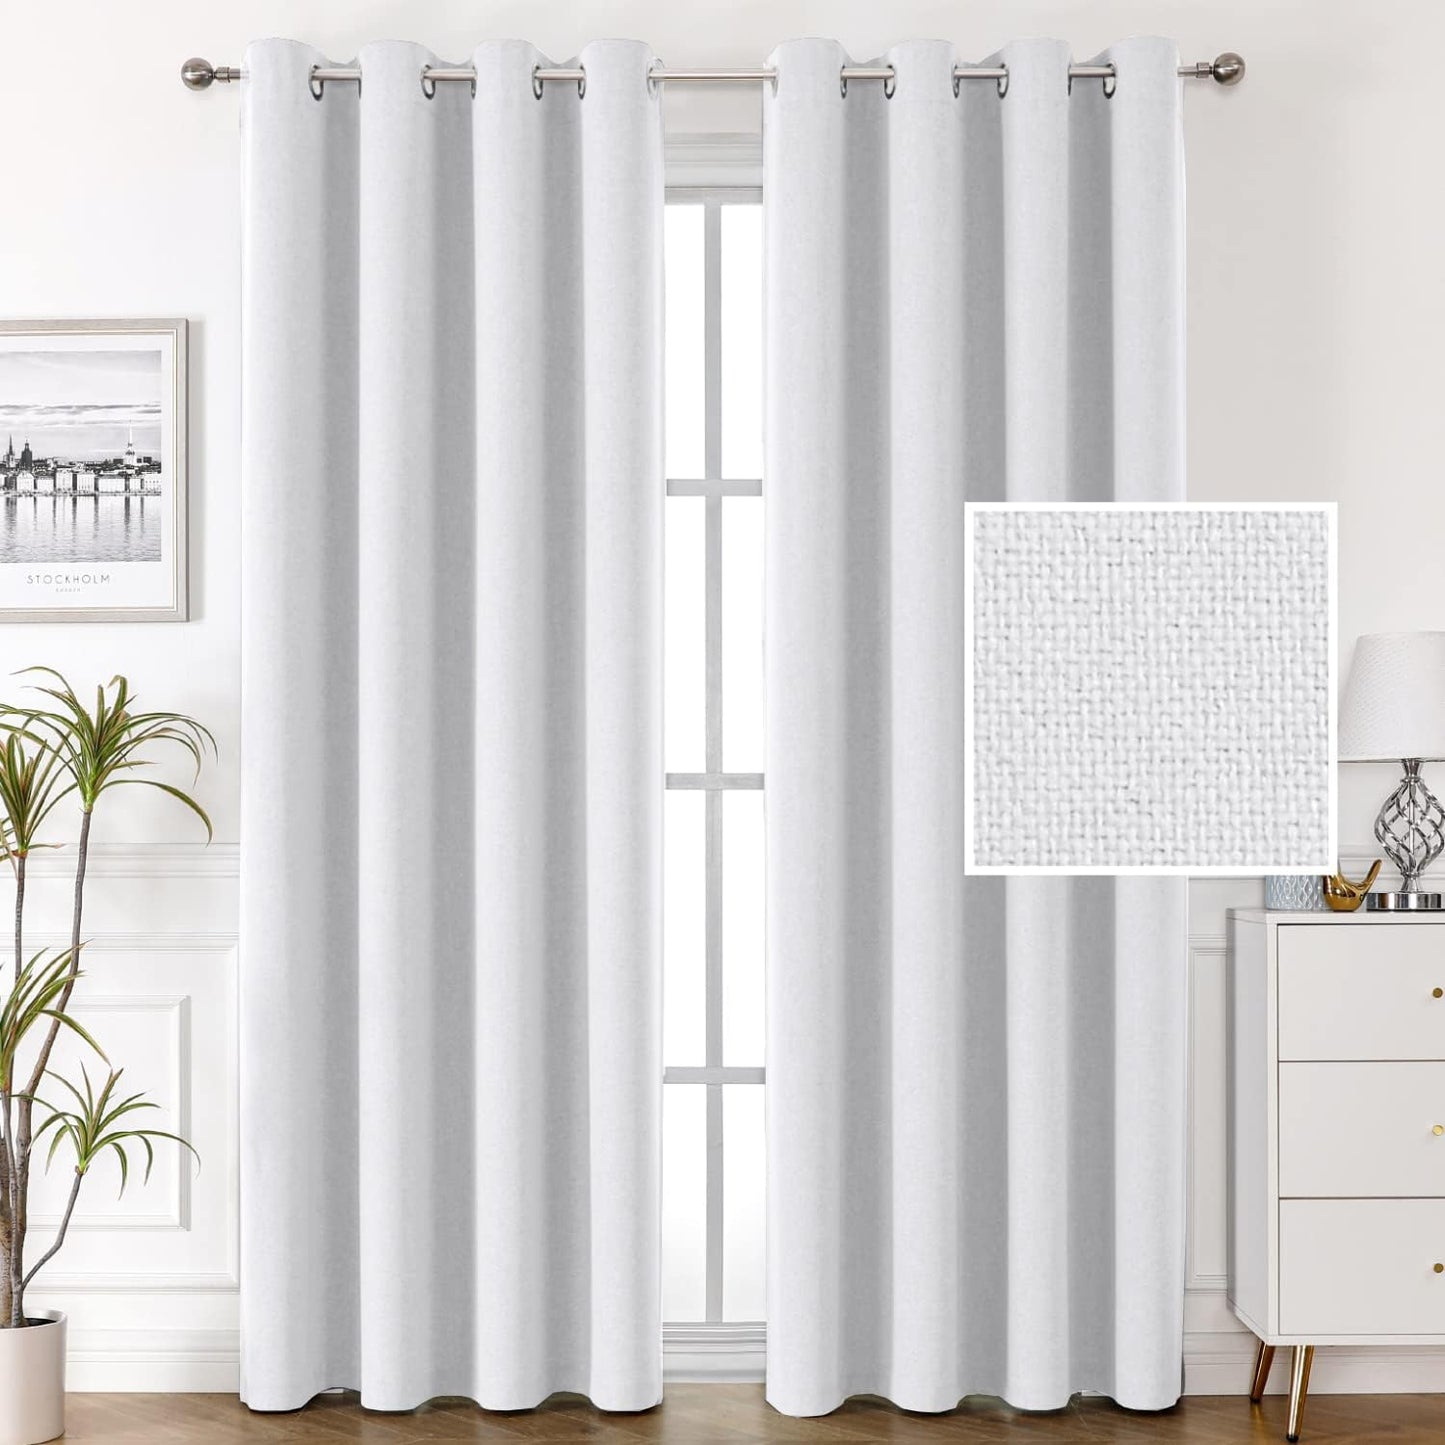 H.VERSAILTEX 100% Blackout Linen Look Curtains Thermal Insulated Curtains for Living Room Textured Burlap Drapes for Bedroom Grommet Linen Noise Blocking Curtains 42 X 84 Inch, 2 Panels - Sage  H.VERSAILTEX White 52"W X 96"L 